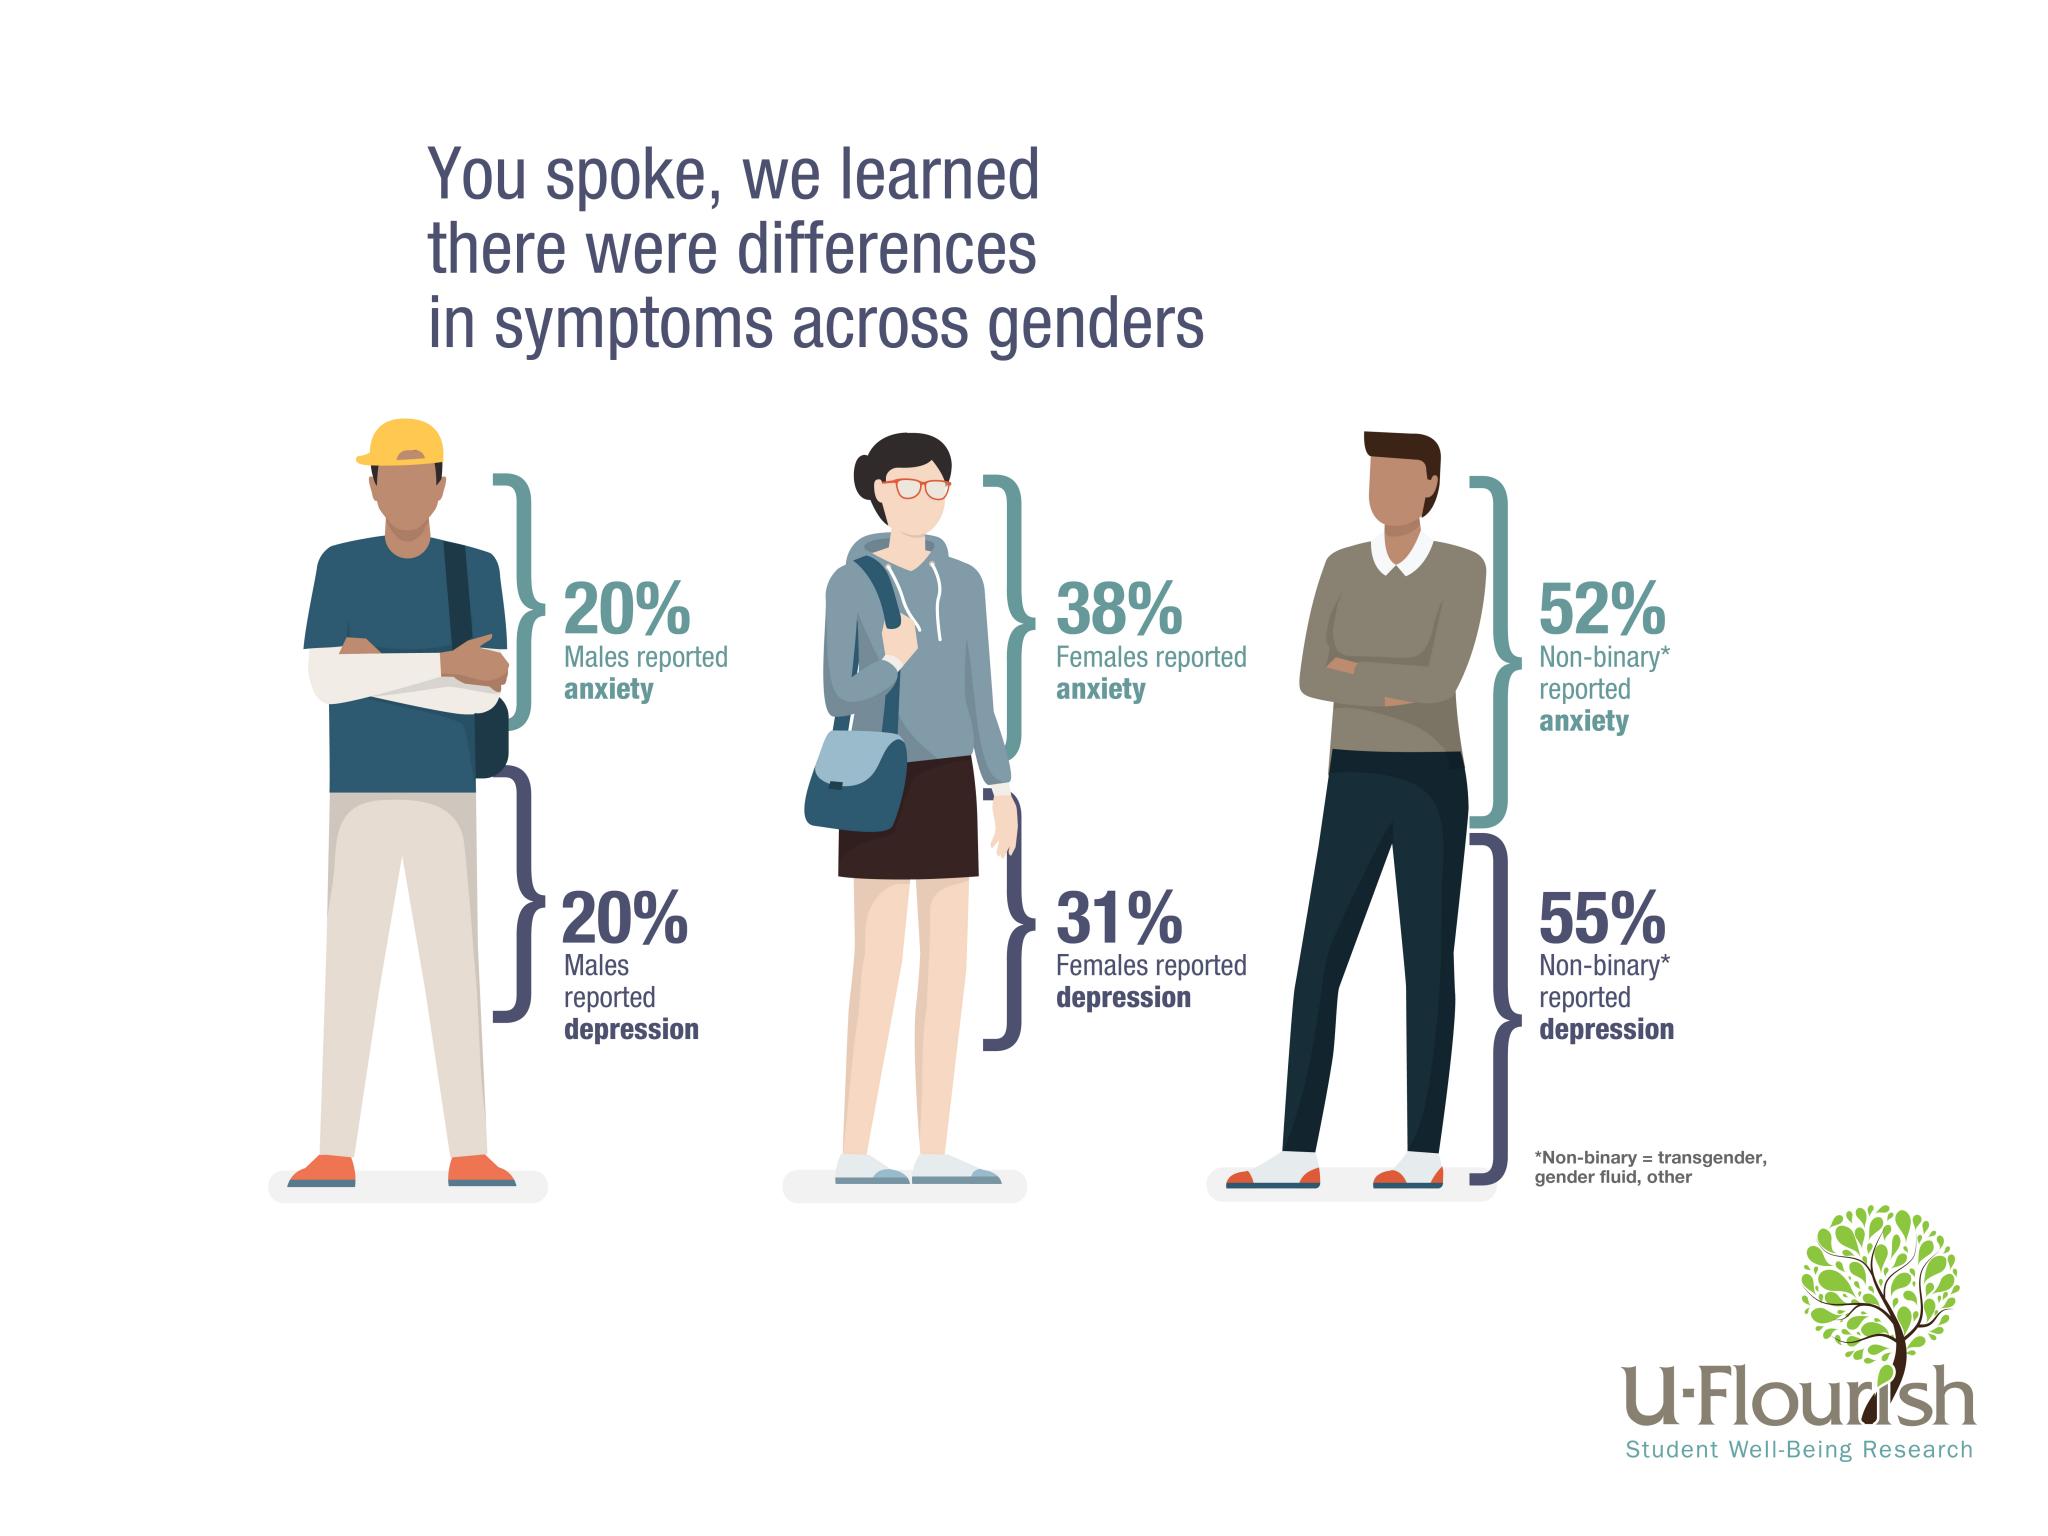 You spoke, we learned there were difference in symptoms across genders